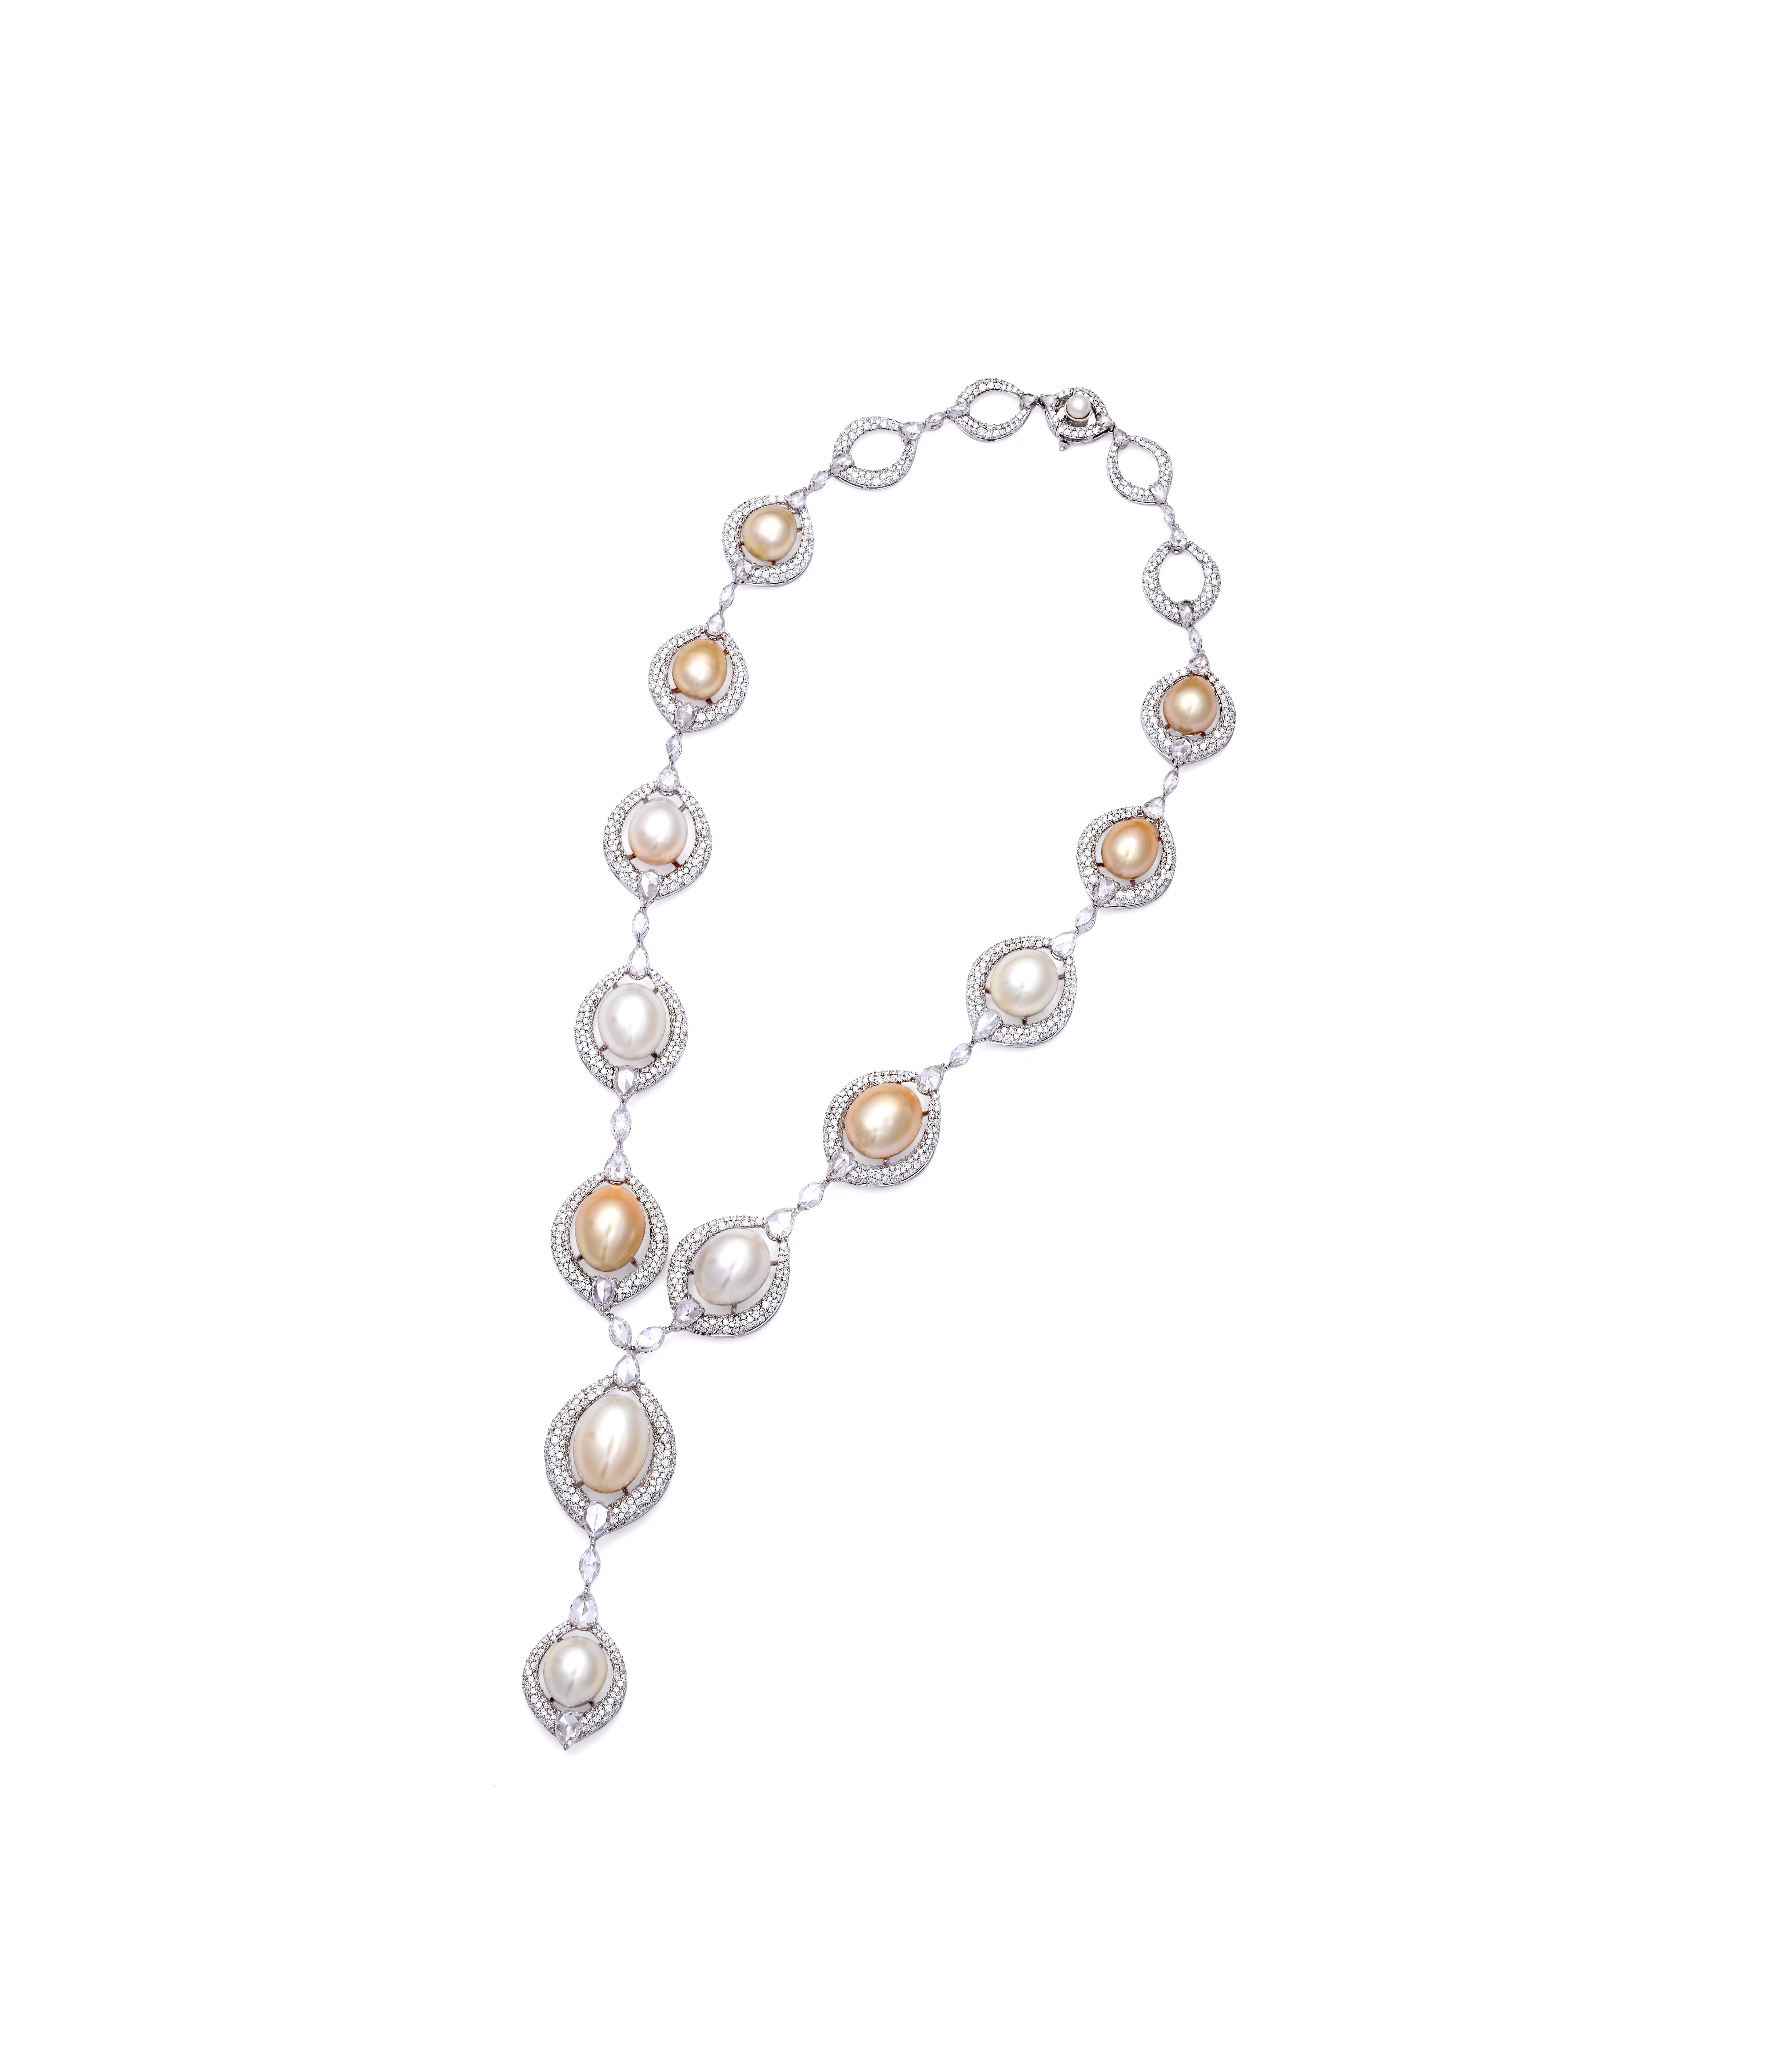 Natural South Pearl and Diamond Necklace with Earrings For Sale 2